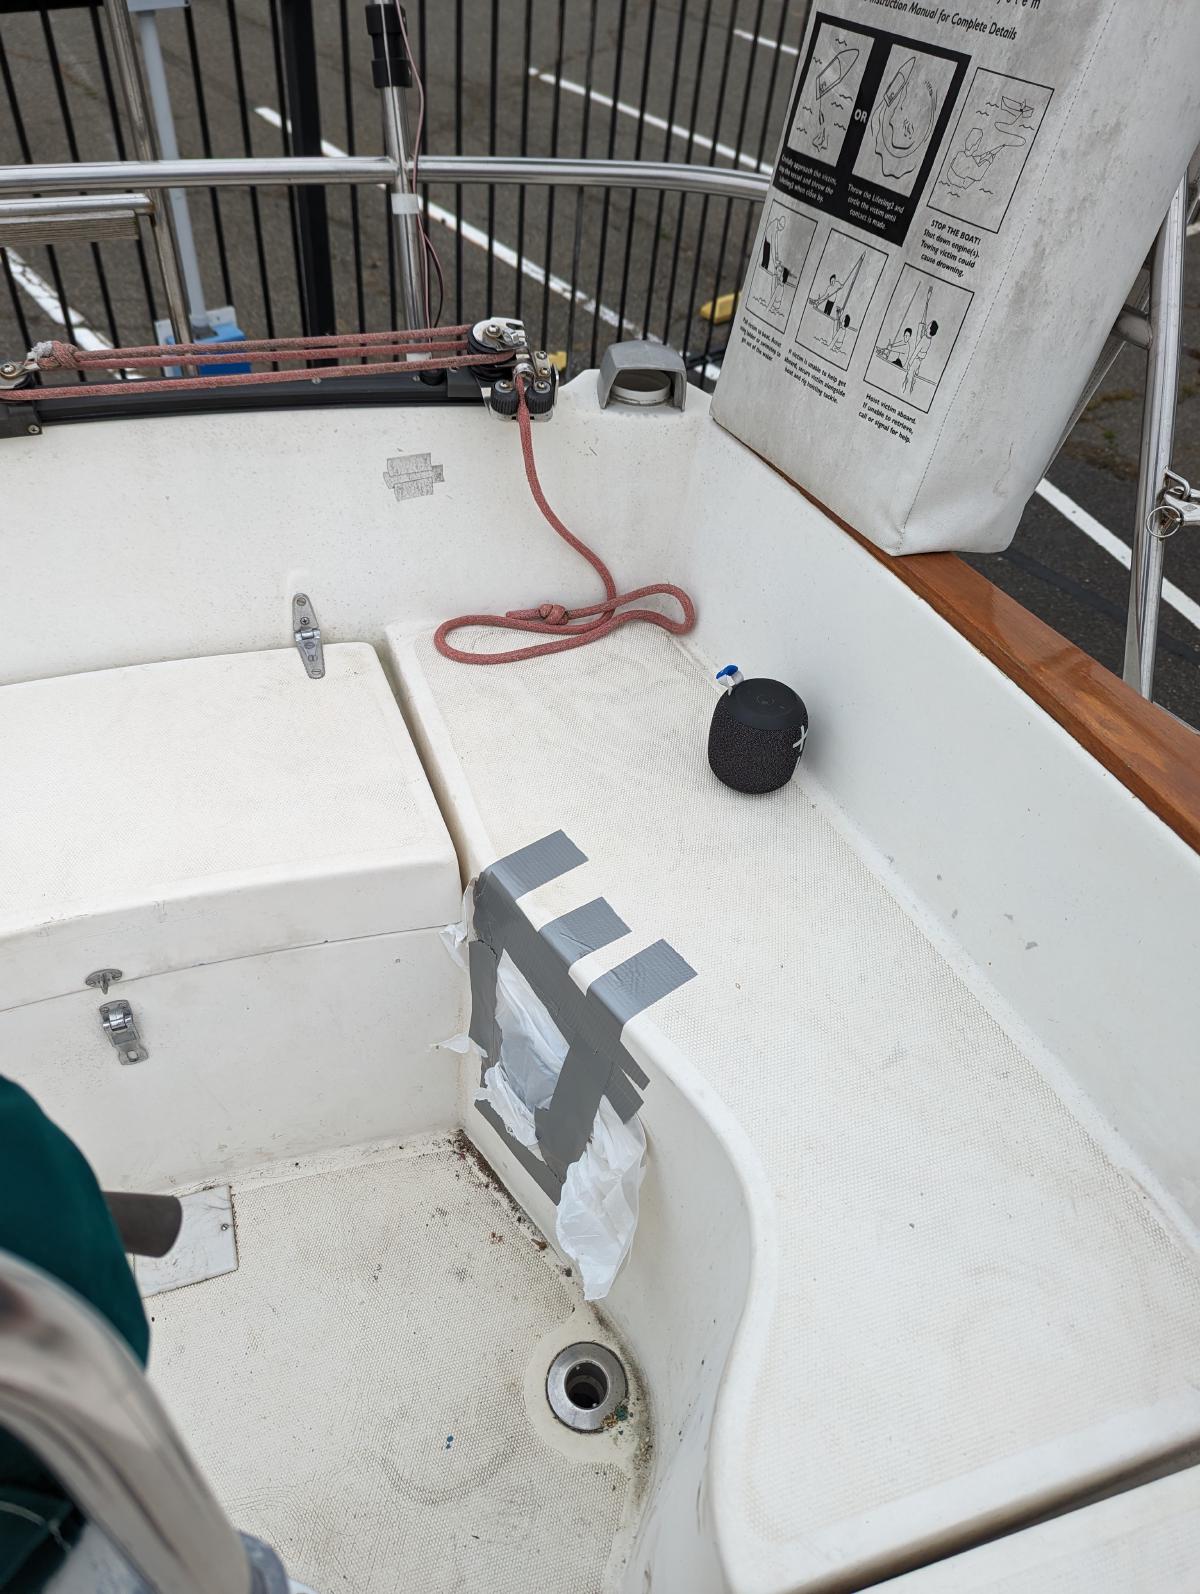 Trash bags covering the hole where the manual bilge pump is stuck.